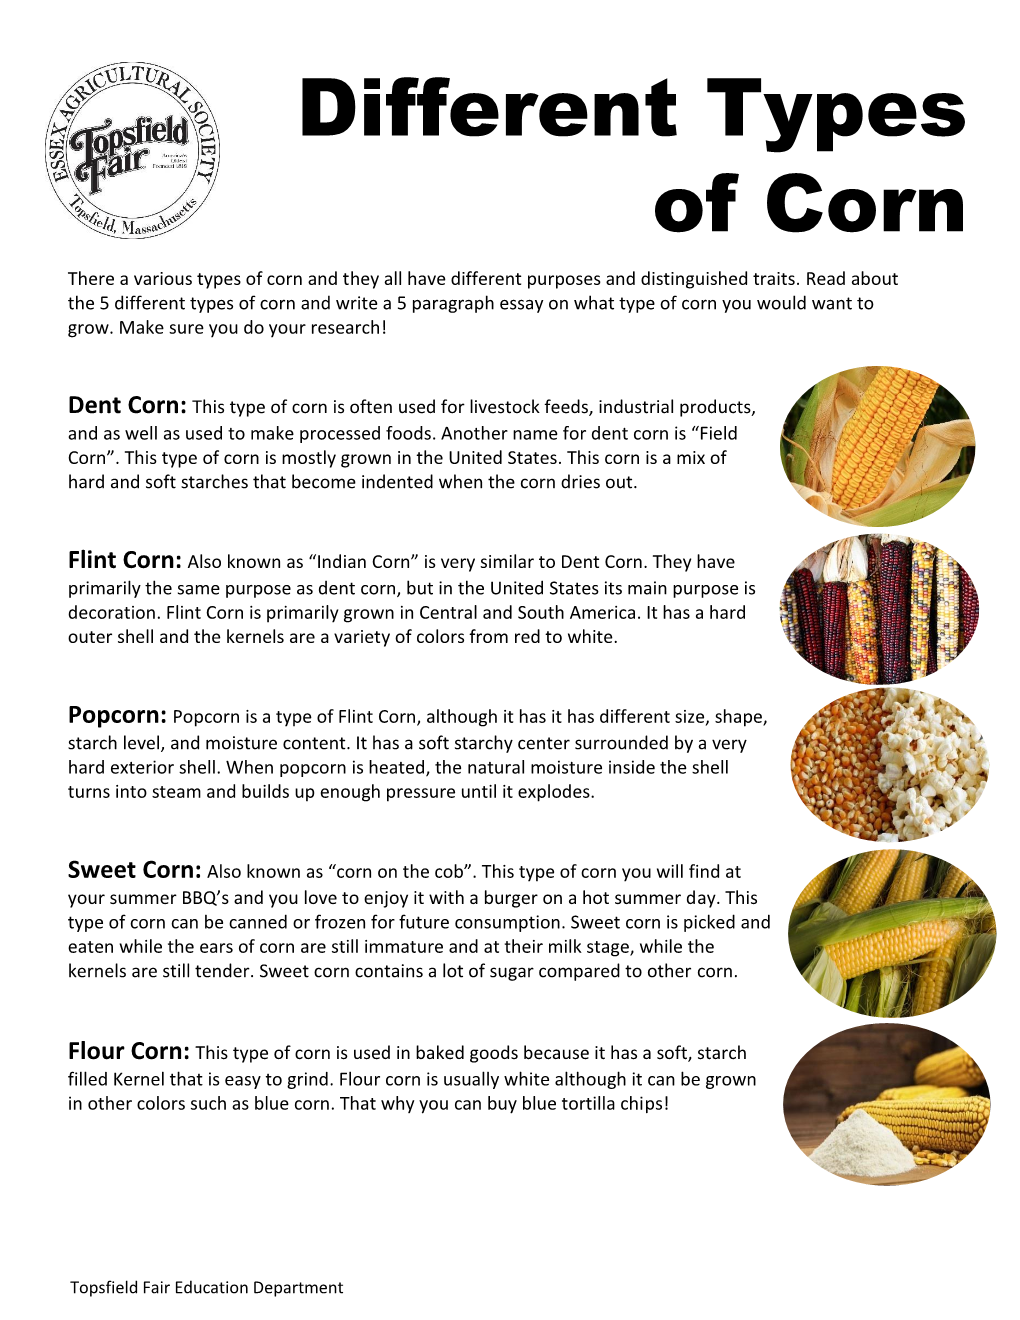 Different Types of Corn There a Various Types of Corn and They All Have Different Purposes and Distinguished Traits